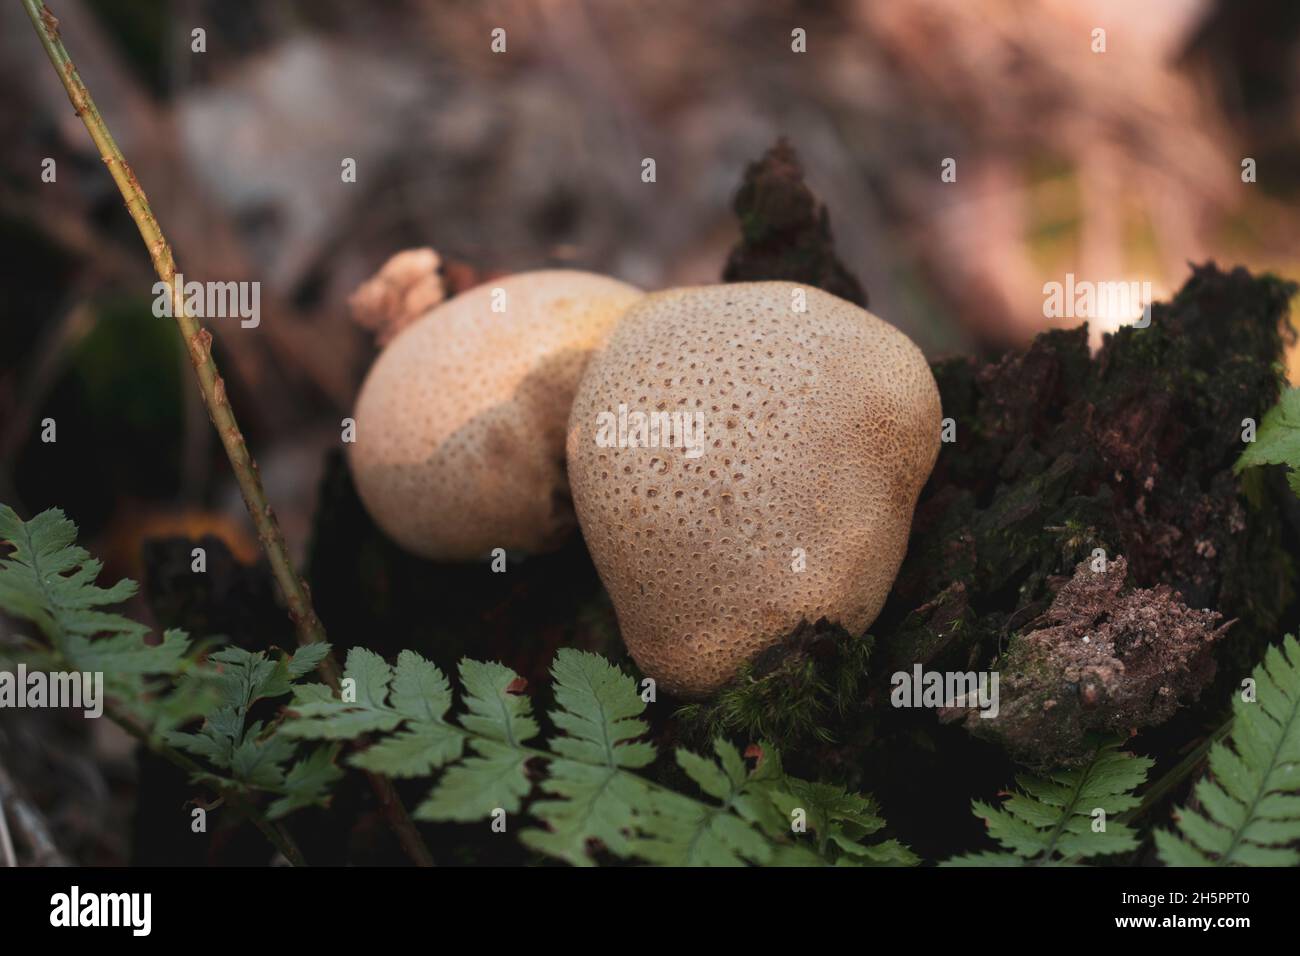 Two Scleroderma citrinum mushrooms (a.k.a. Common Earthball) on a tree. Inedible mushrooms. Stock Photo